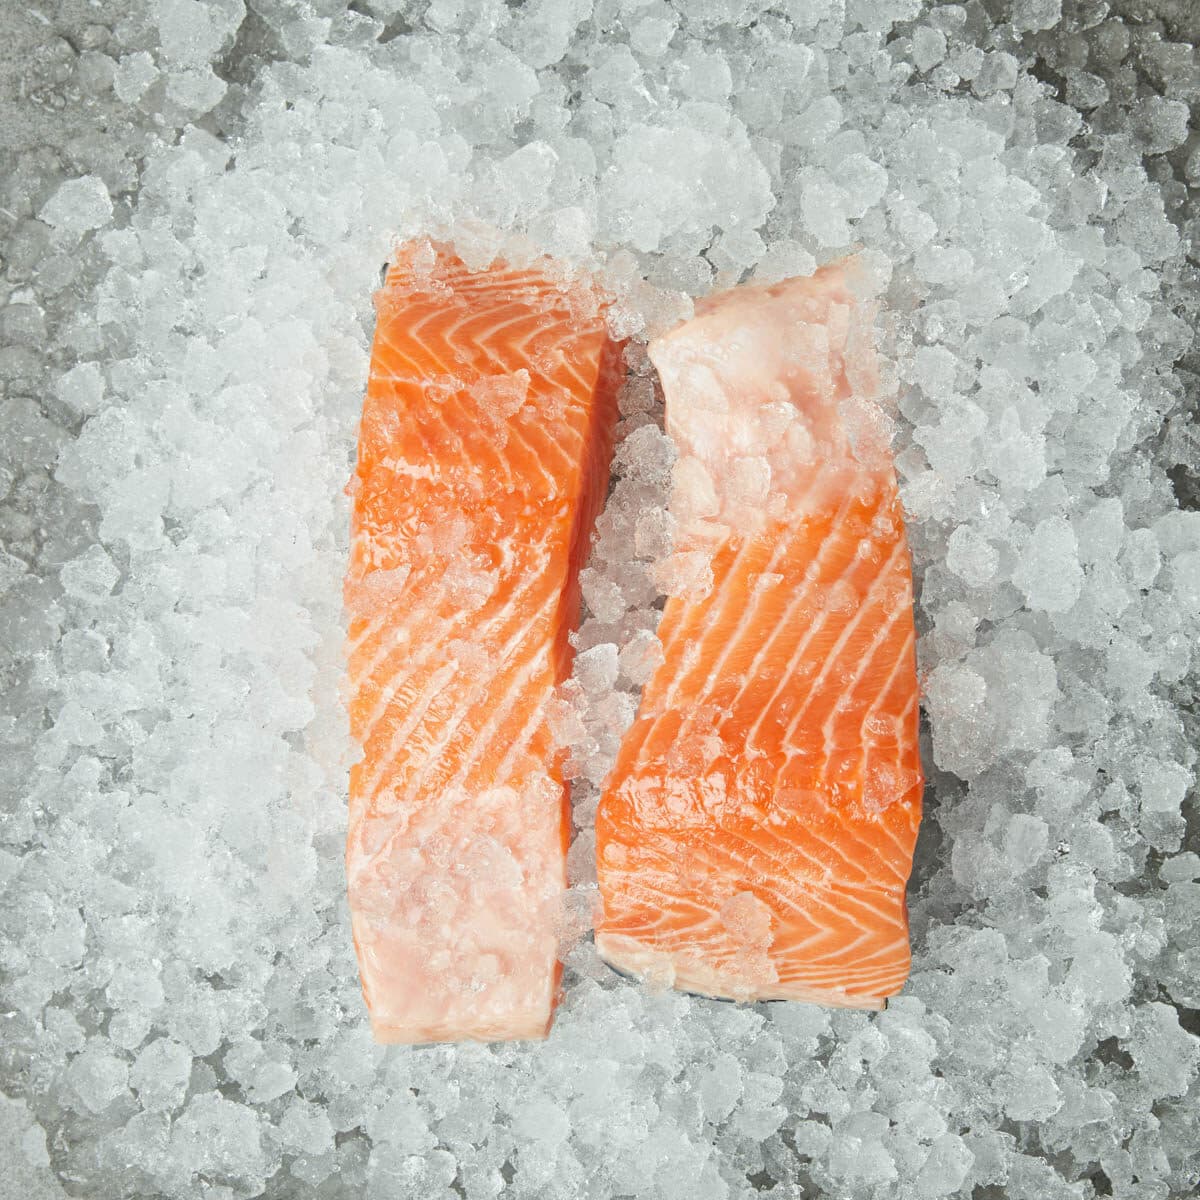 Fresh salmon on a bed of crushed ice.